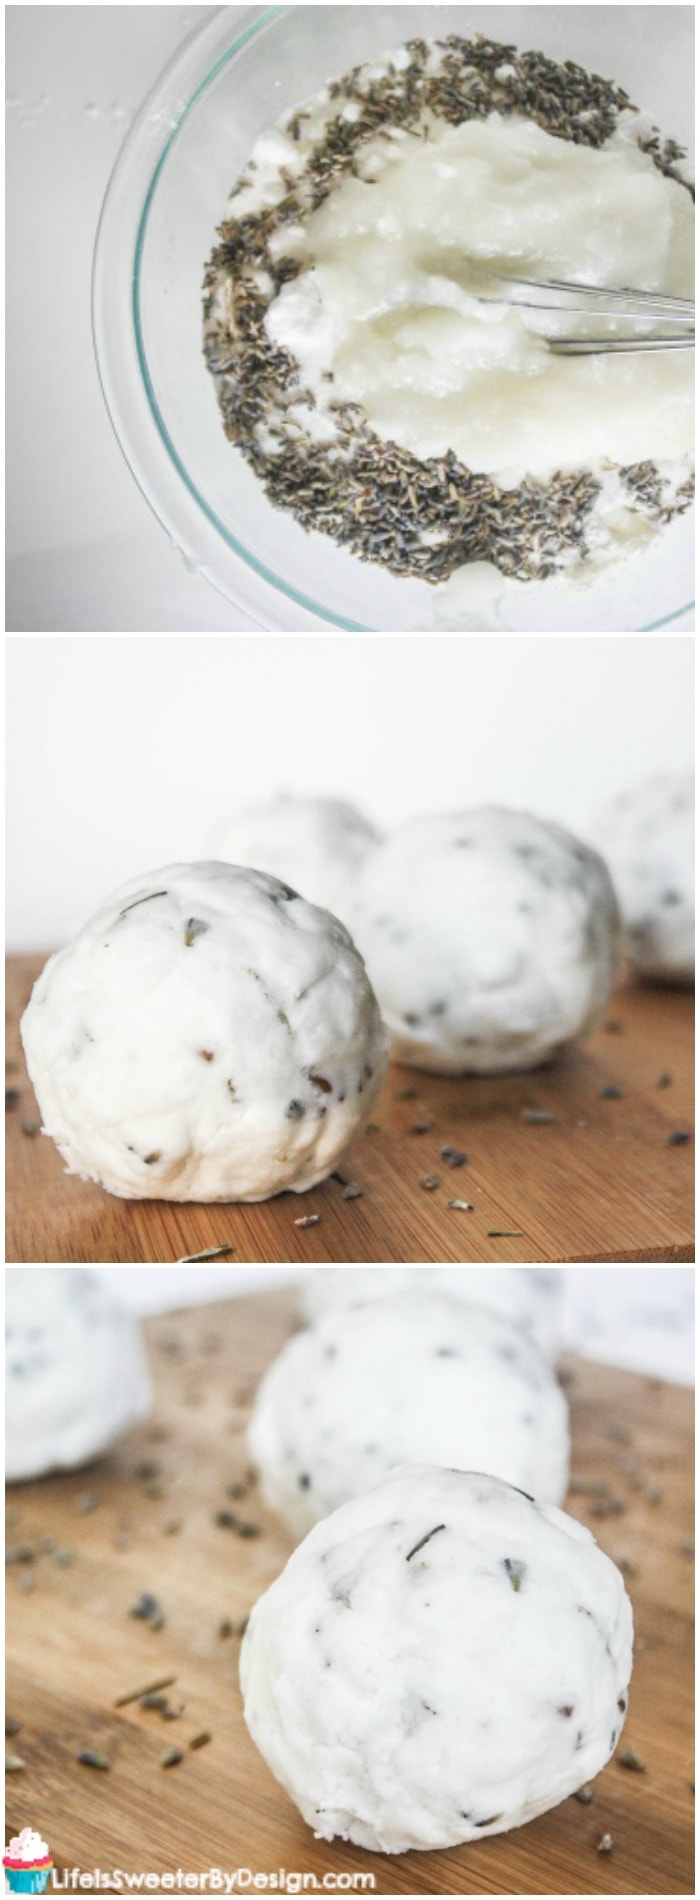 Make some all natural DIY Lavender Bath Bombs for great relaxation. These also make wonderful DIY gifts! These can be made organic too!